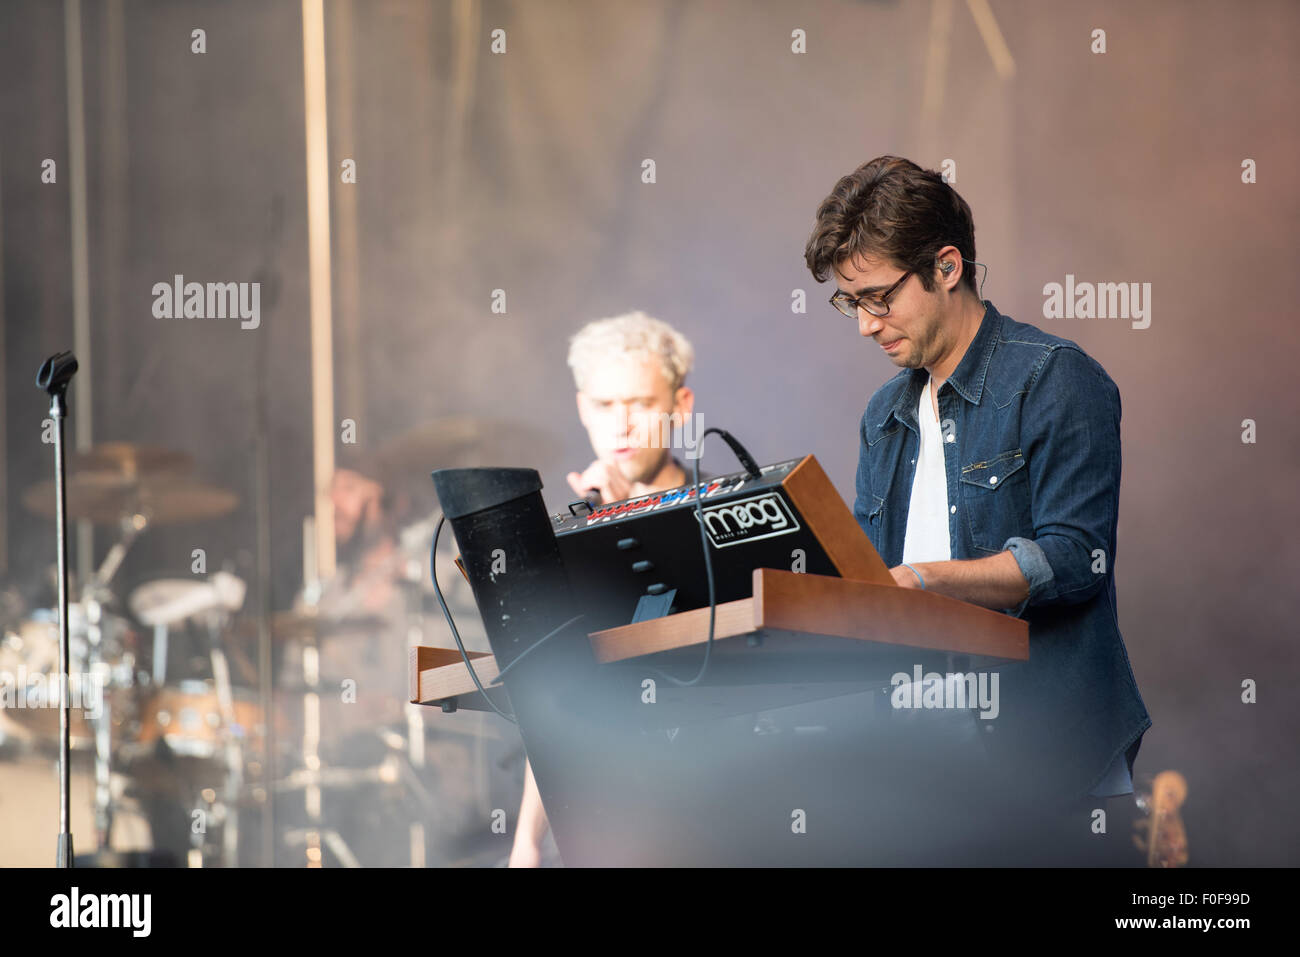 Years& Years perform at Rix FM festival in Norrköping, Sweden Stock Photo